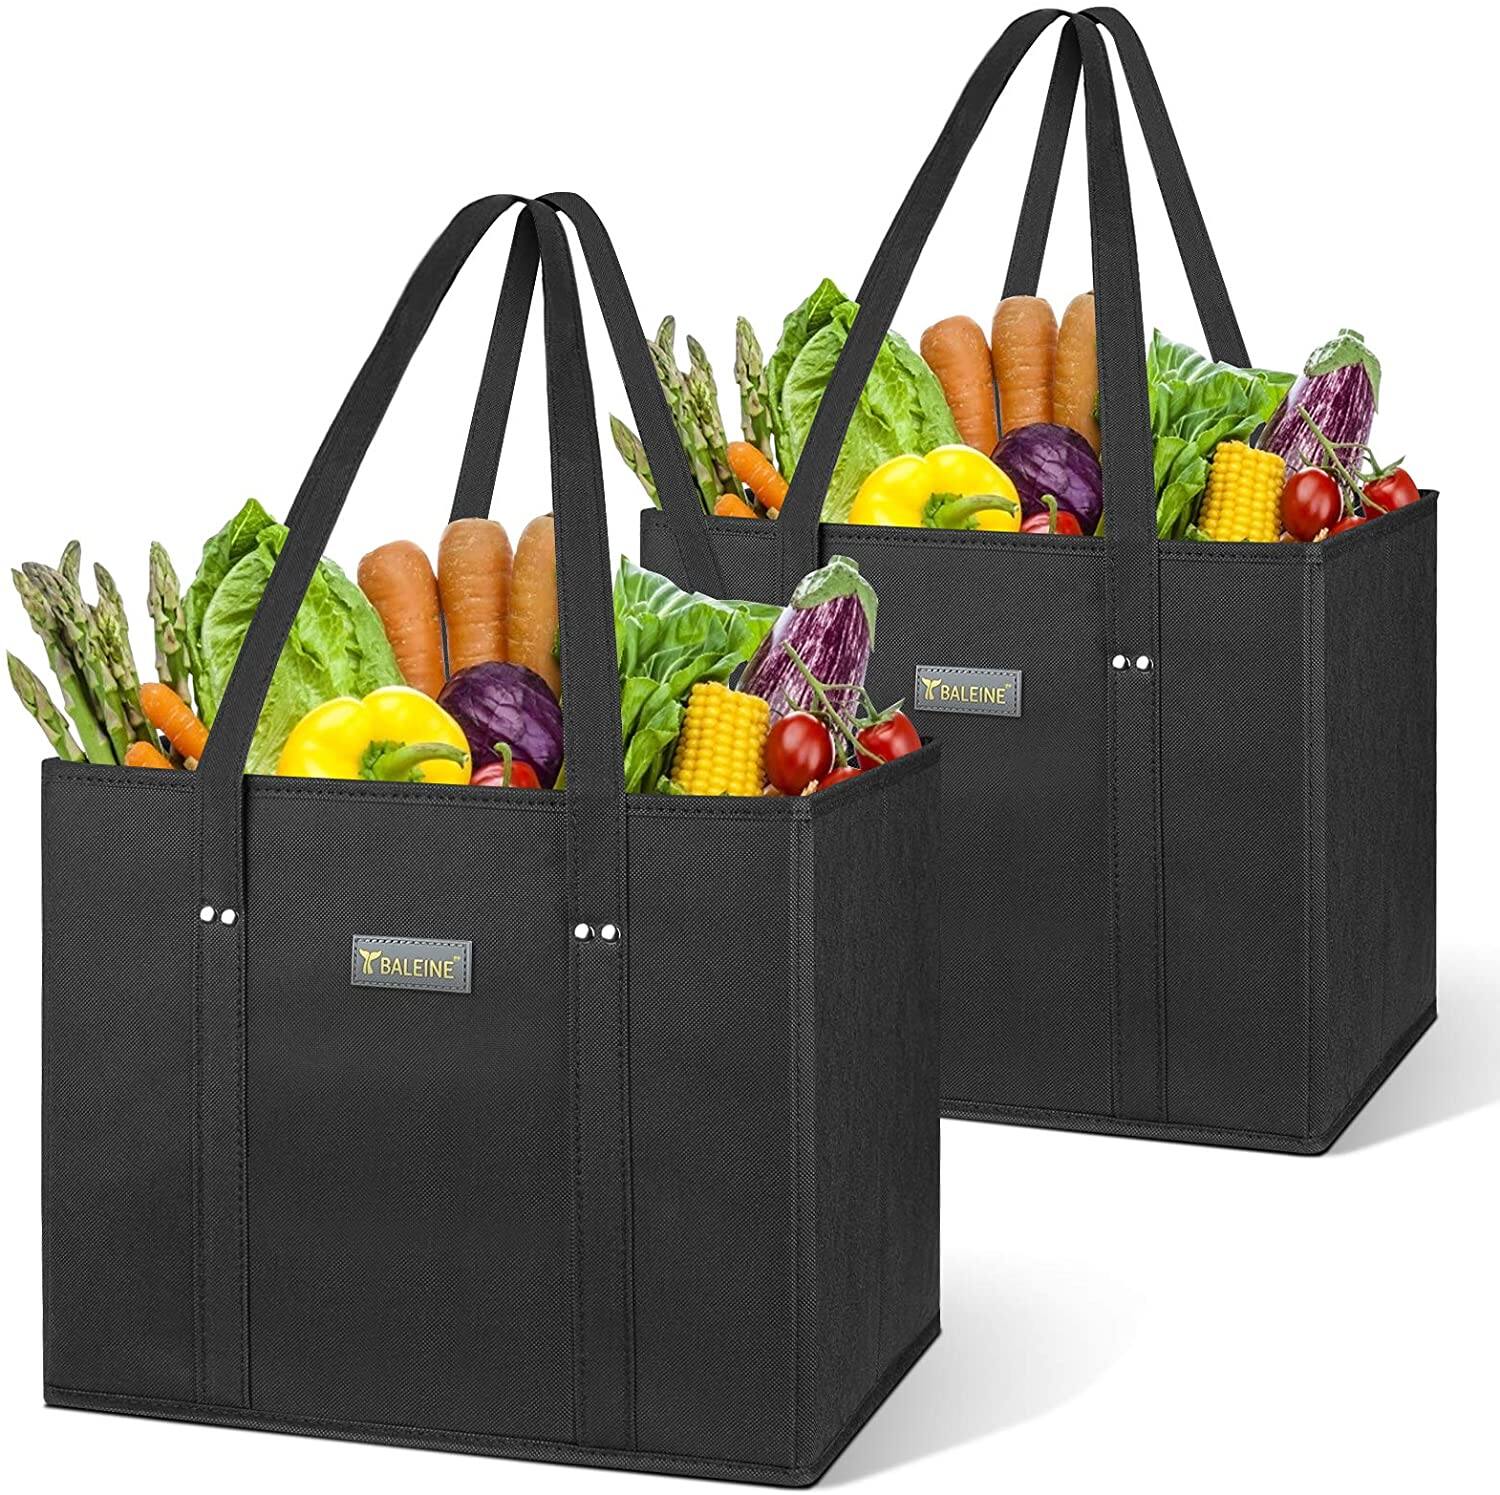 Reusable Shopping Bags with Reinforced Bottom and Handles $12.96 + Free Shipping w/ Amazon Prime or Orders $25+